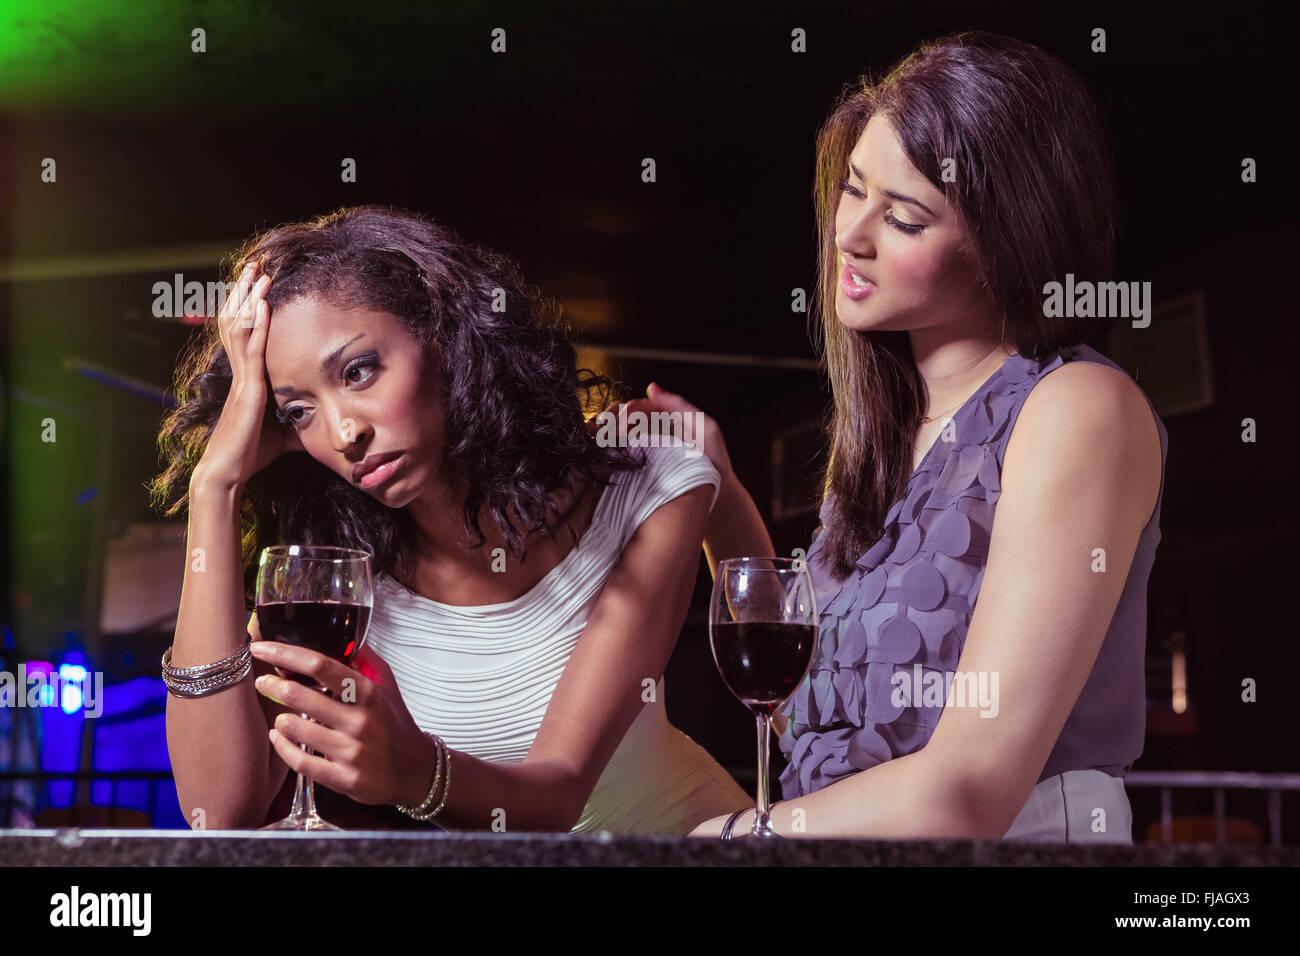 Woman having drinks and comforting her depressed friend Stock Photo